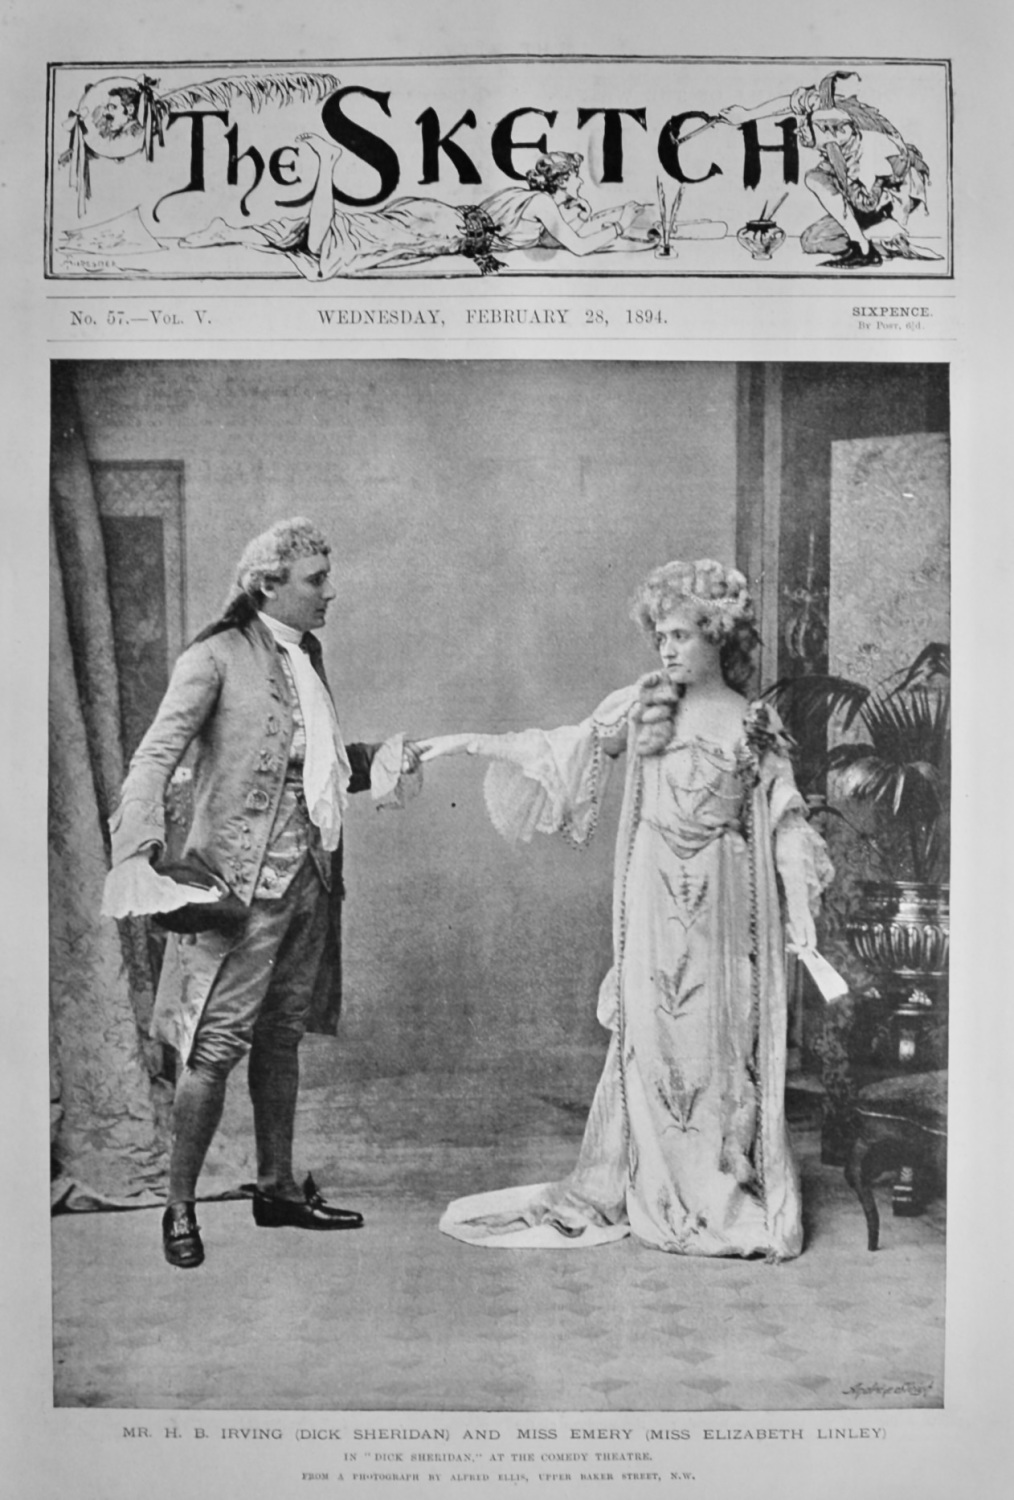 Mr. H. B. Irving (Dick Sheridan) and Miss Emery (Miss Elizabeth Linley) in 